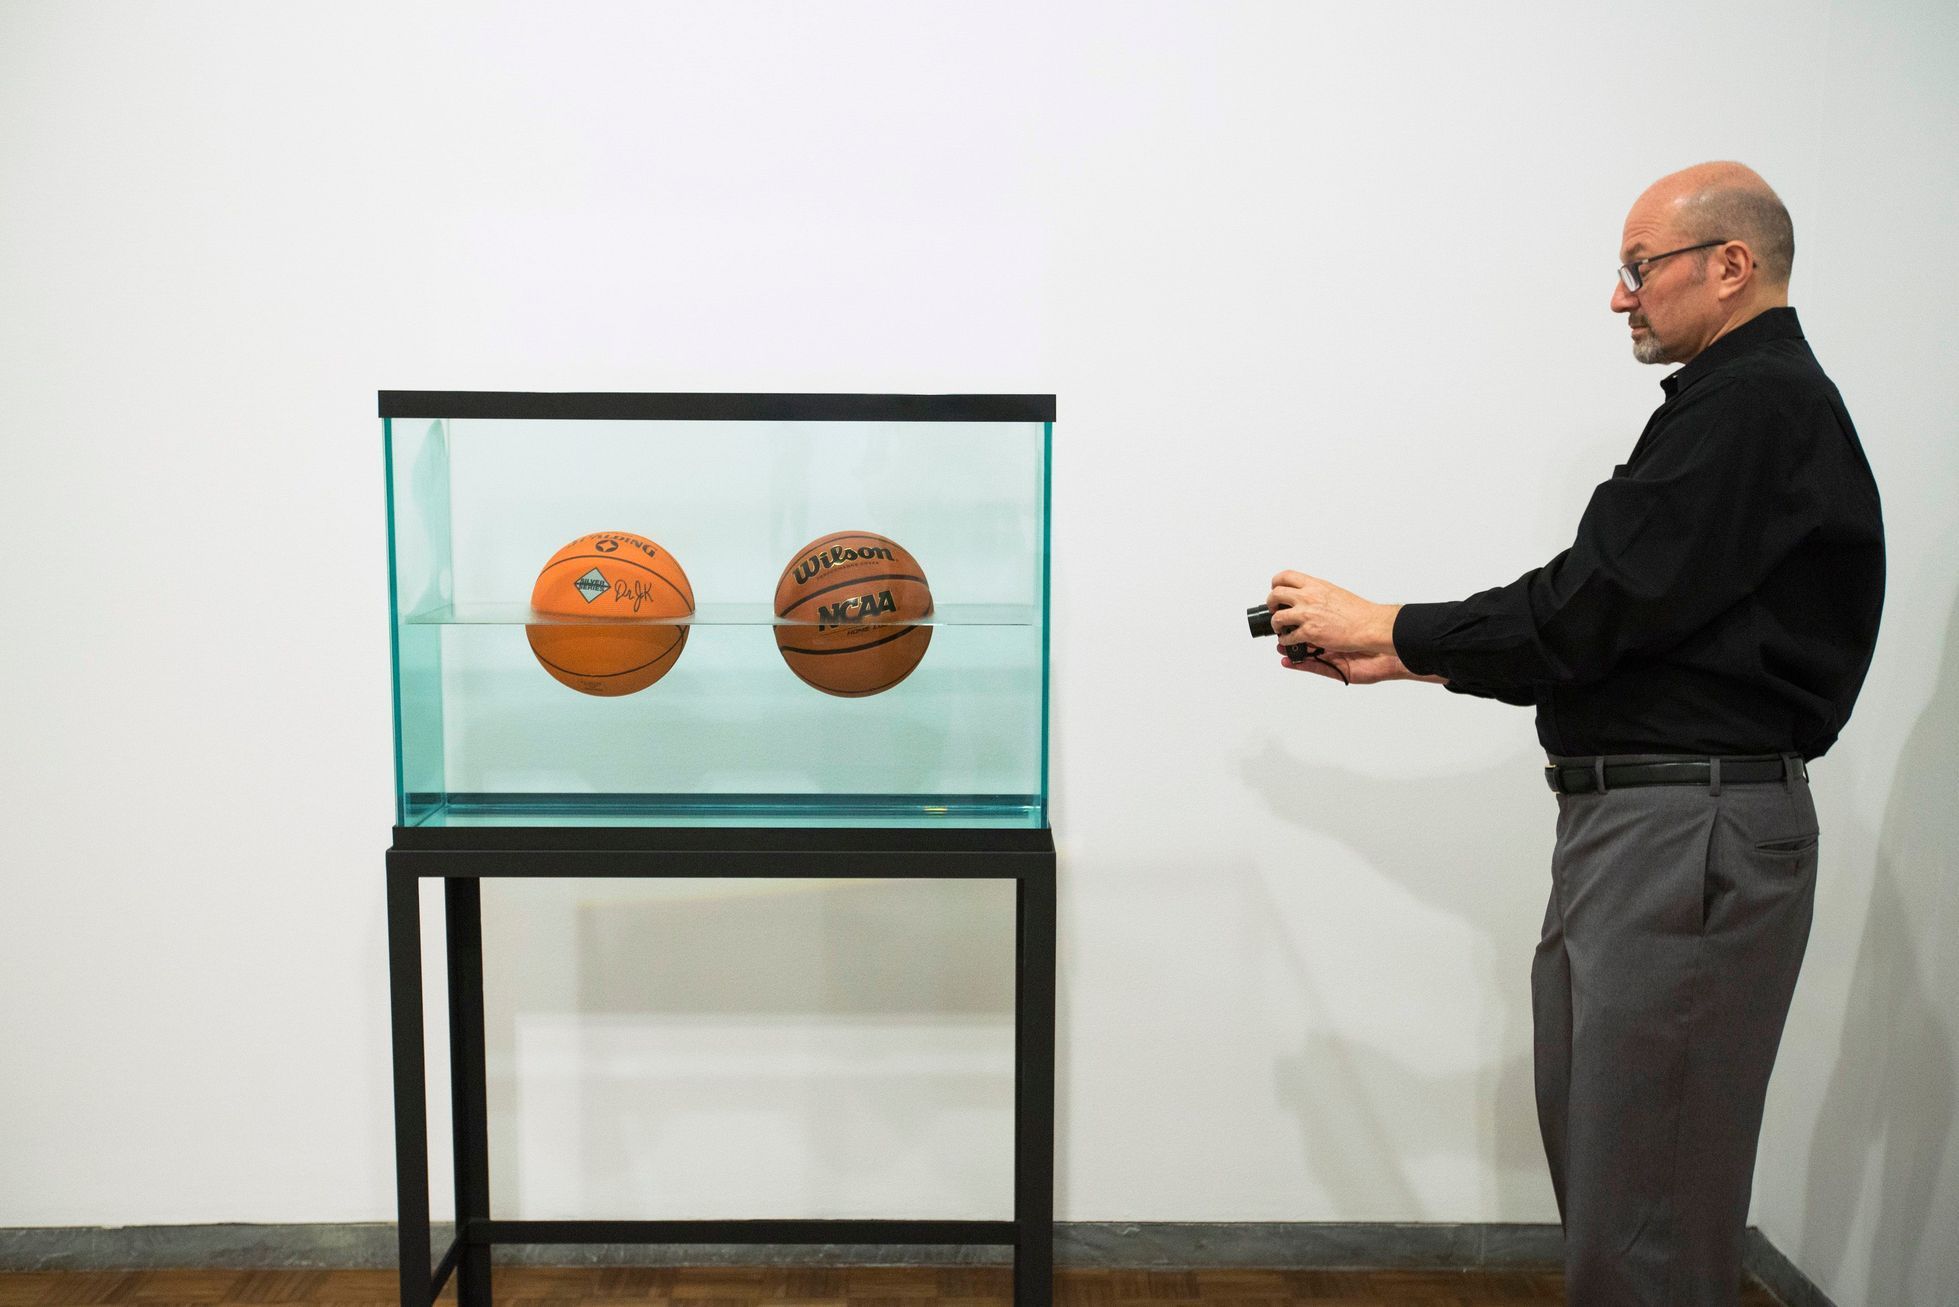 A man photographs the sculpture Two Ball 50/50 Tank during a media preview before the opening of a Jeff Koons retrospective at the Whitney Museum of American Art in New York